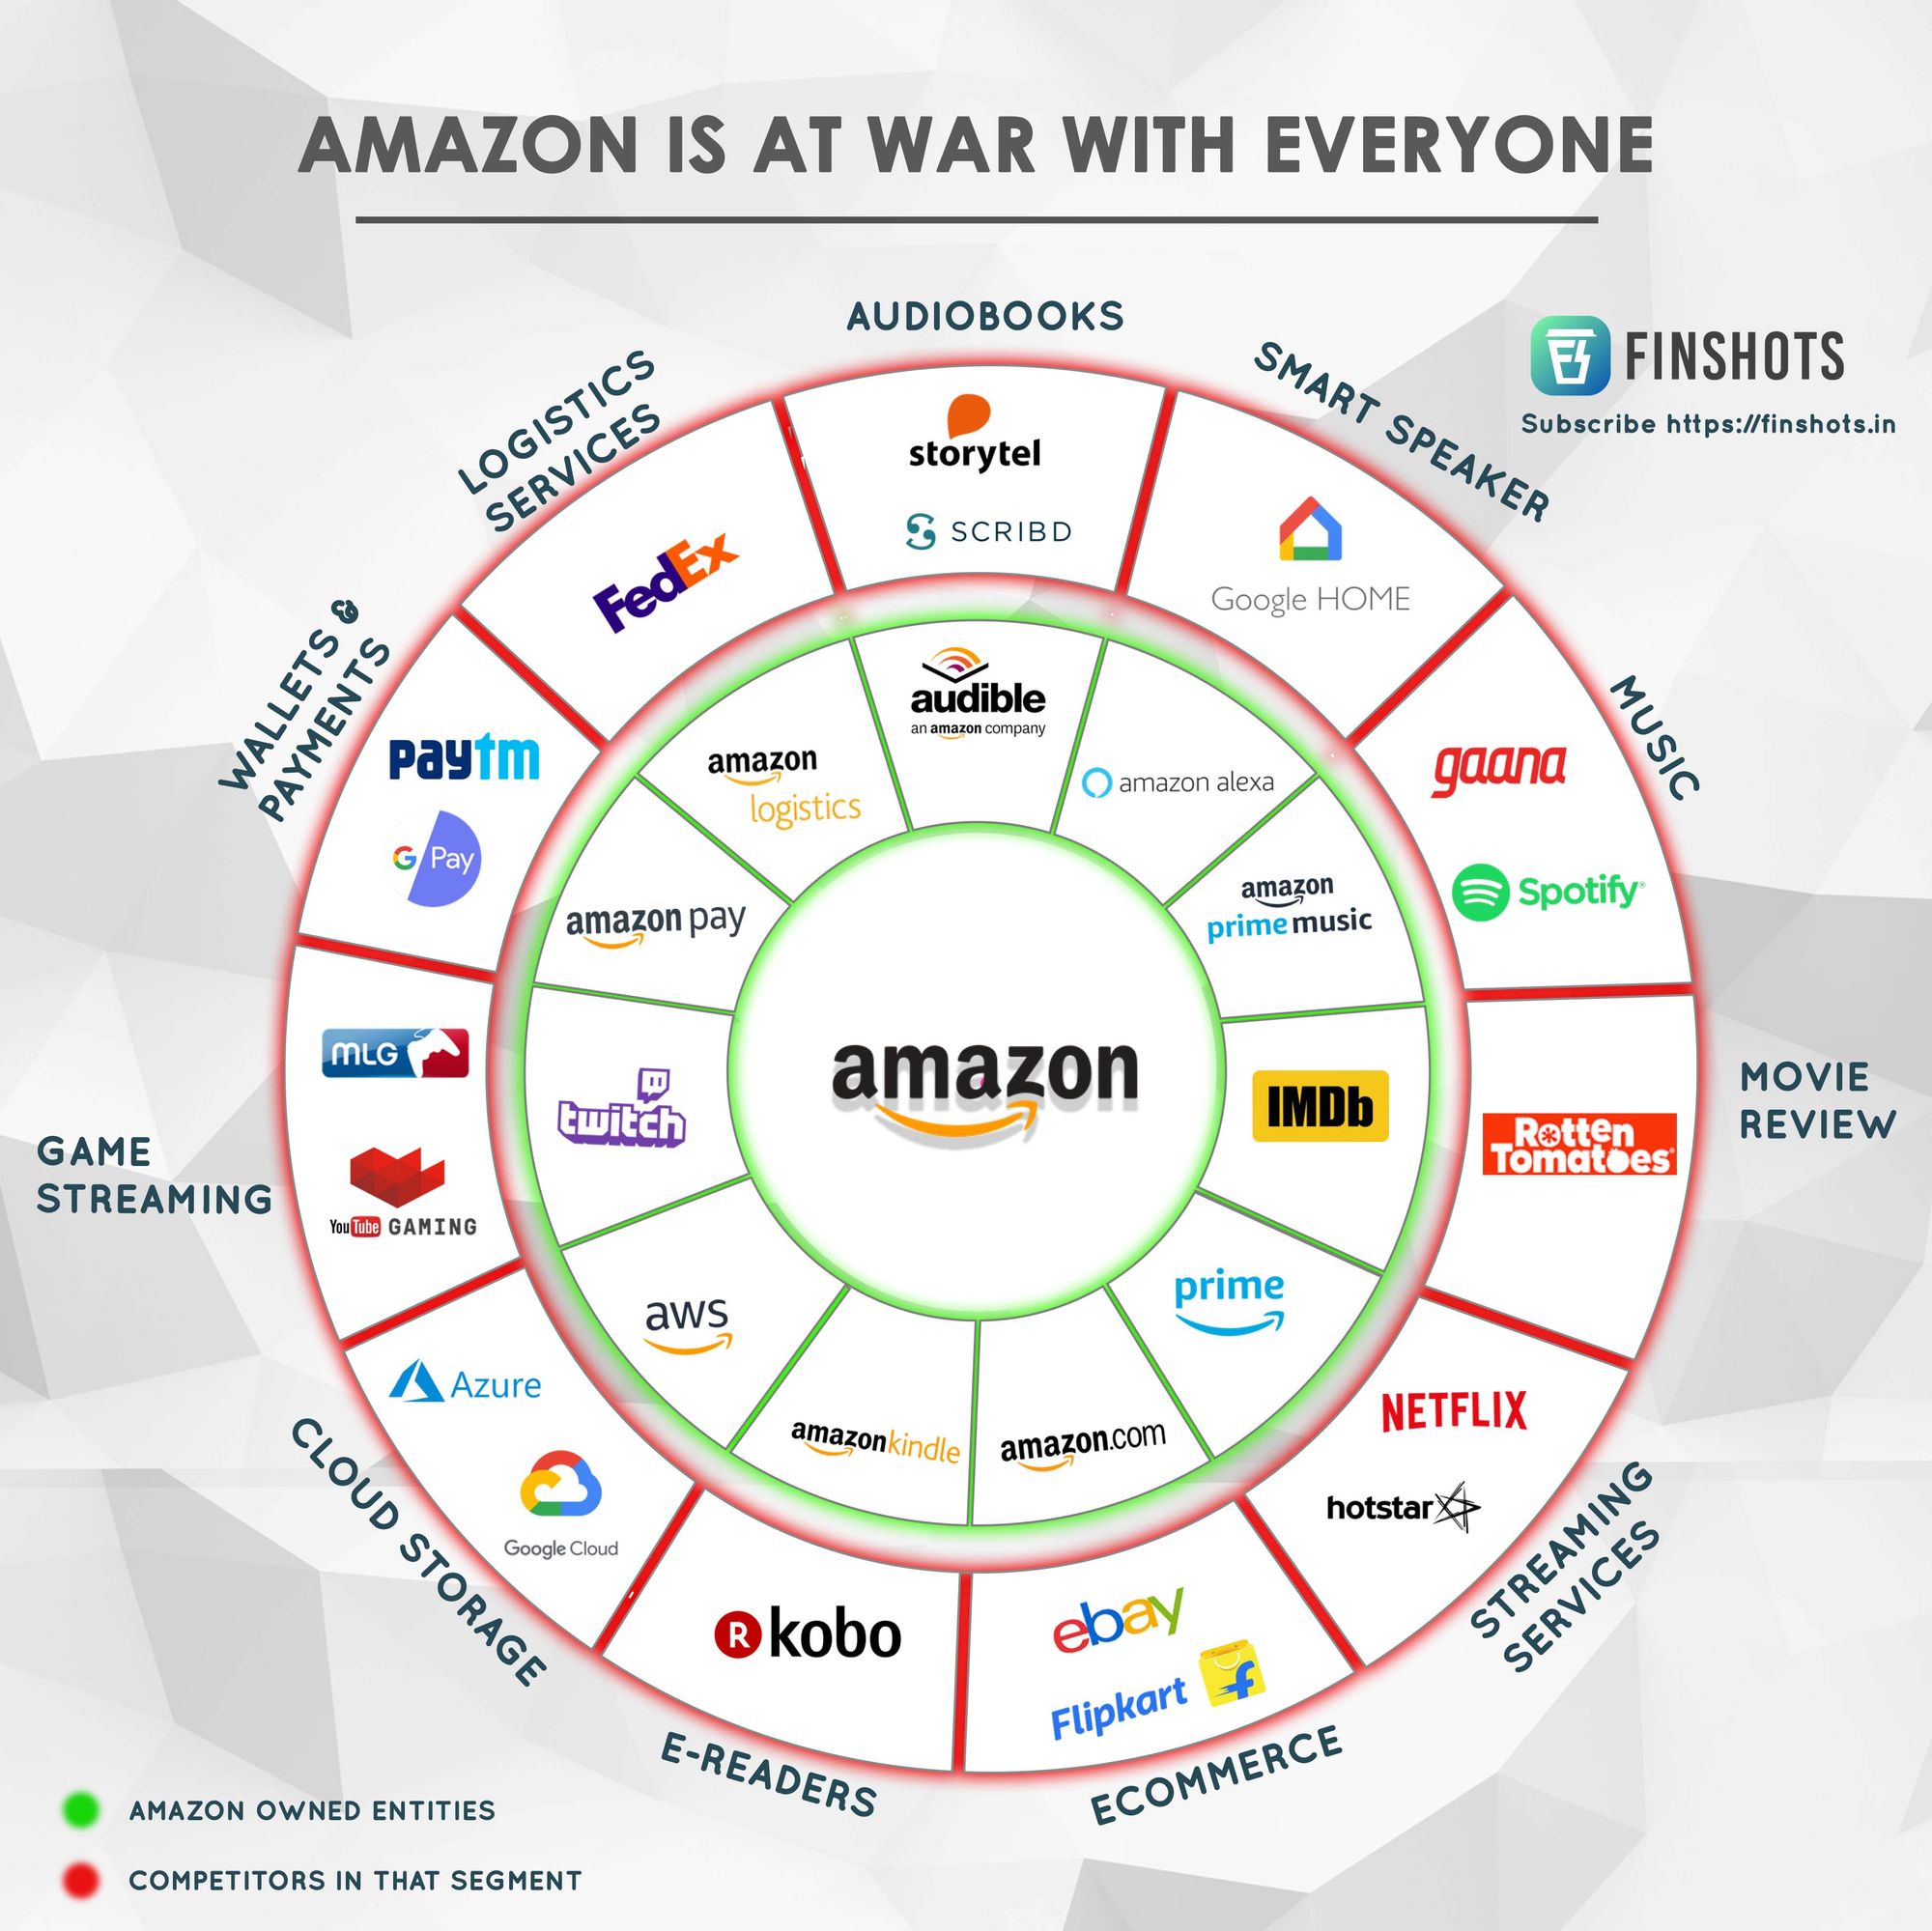 Das System Amazon (c) finshots.in/infographic/amazon-is-at-war-with-everyone